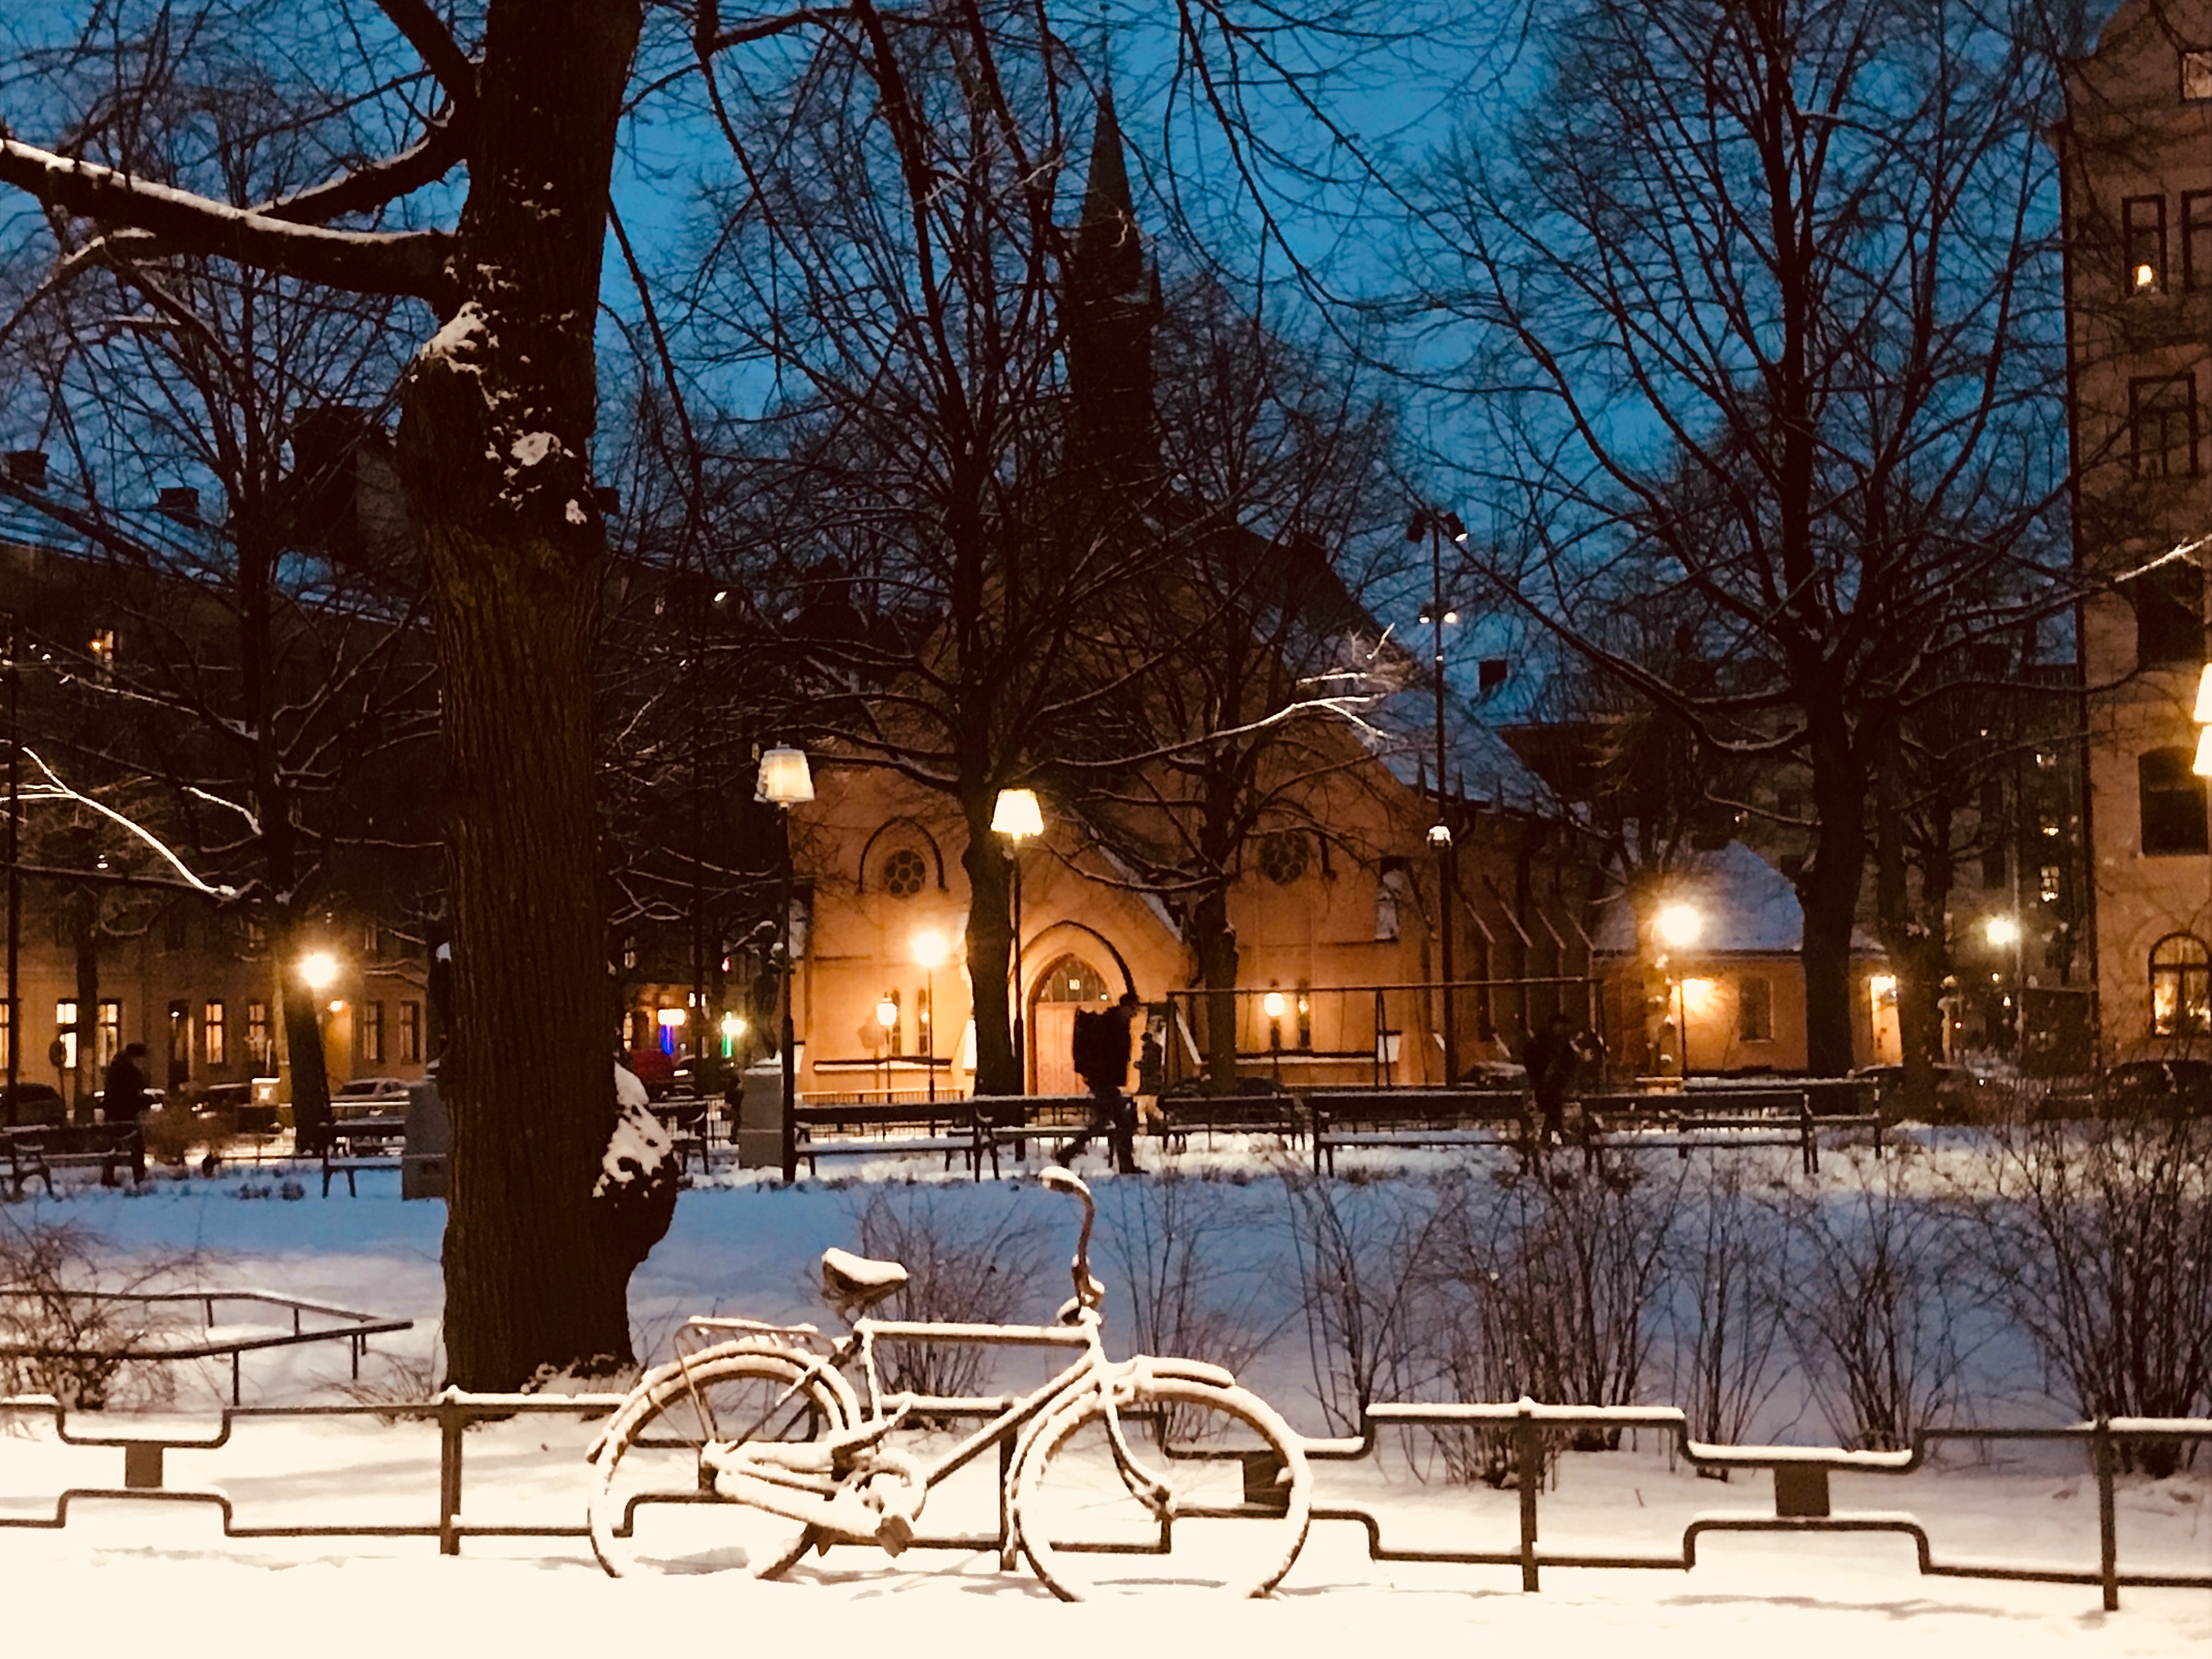 Snow covered bike near fence during nighttime photo